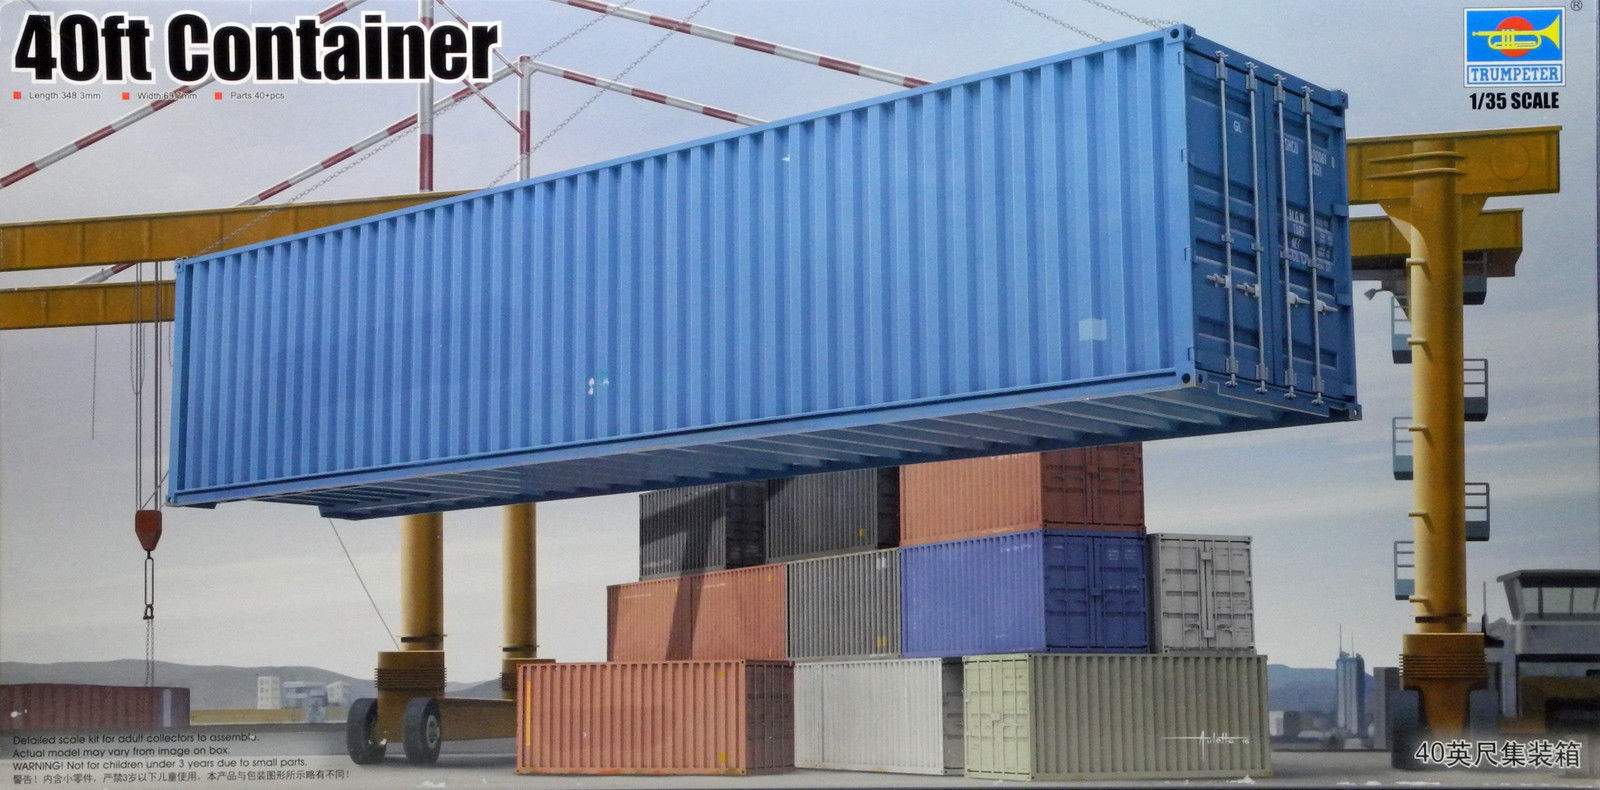 Containers from Japan